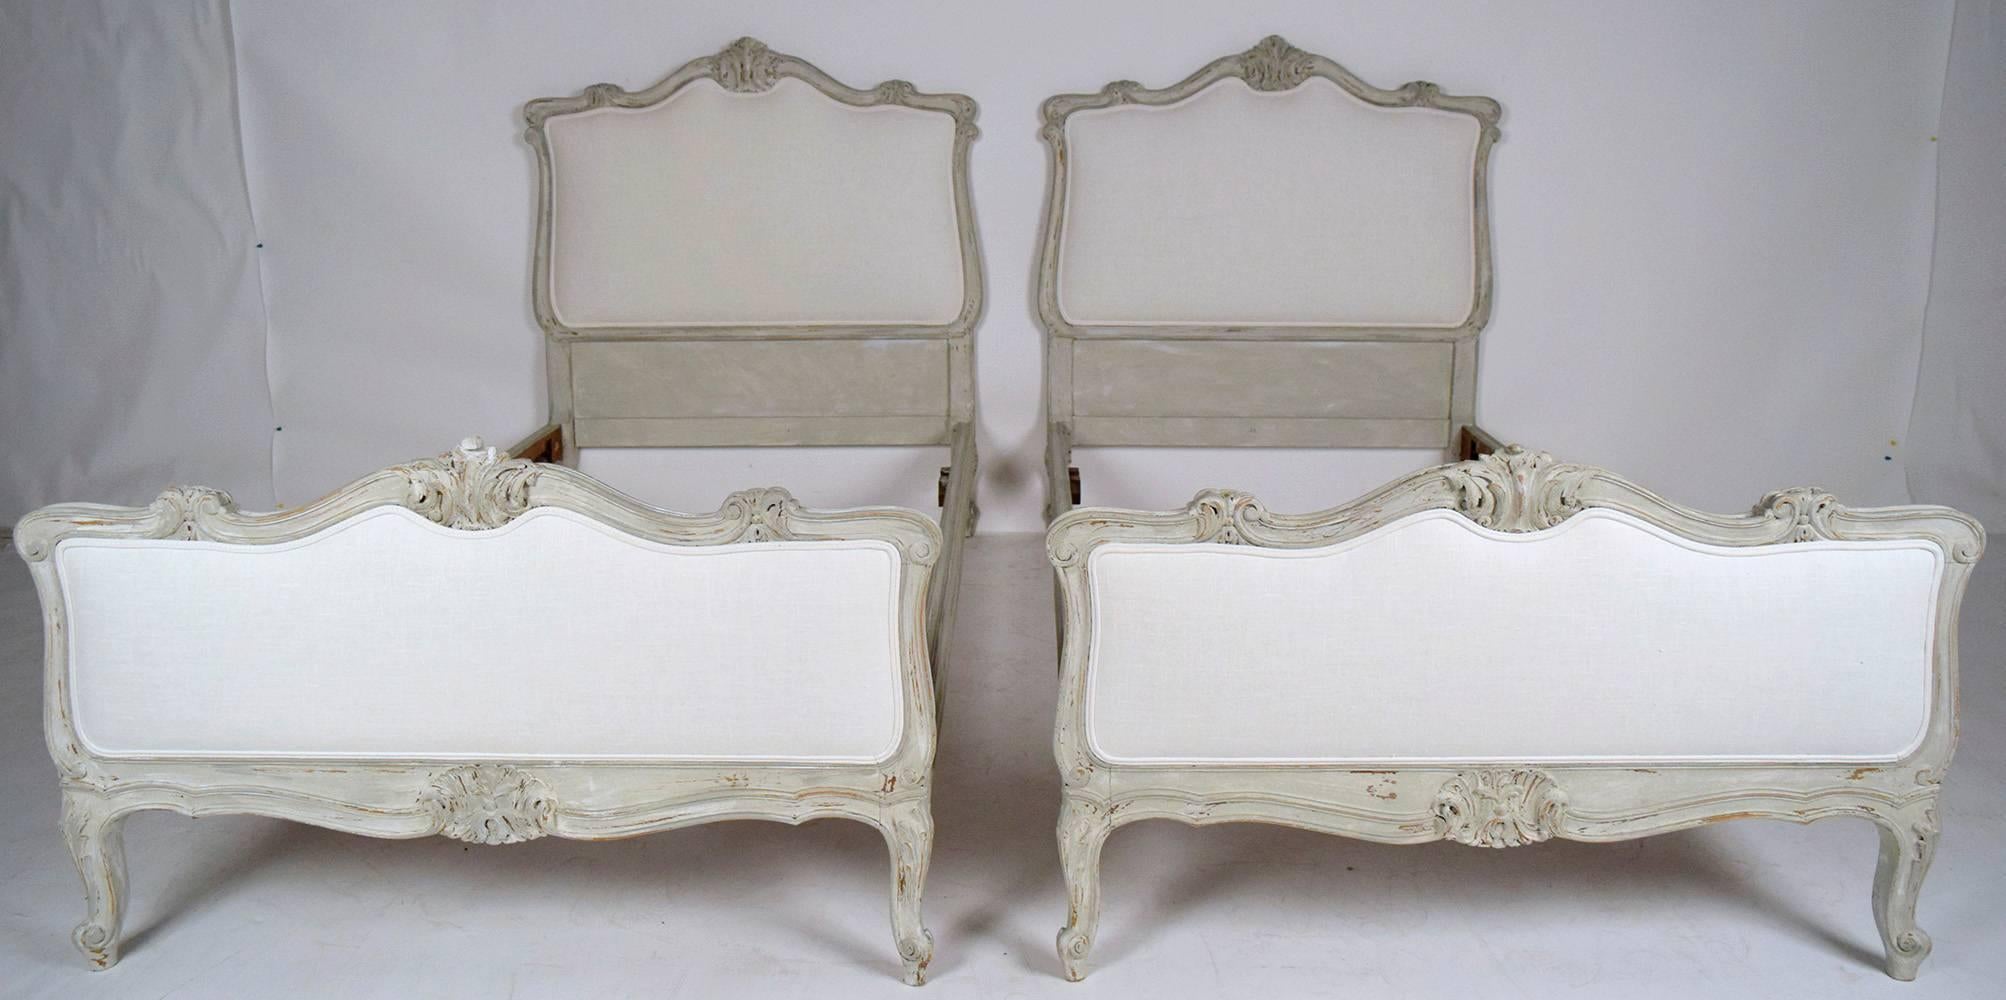 This lovely pair of 1900's French Louis XV-style bed frames are made from solid walnut wood with elegant carvings on the headboard, foot-board and legs. The frames have been recently painted in a pale gray color with a distressed finish. The